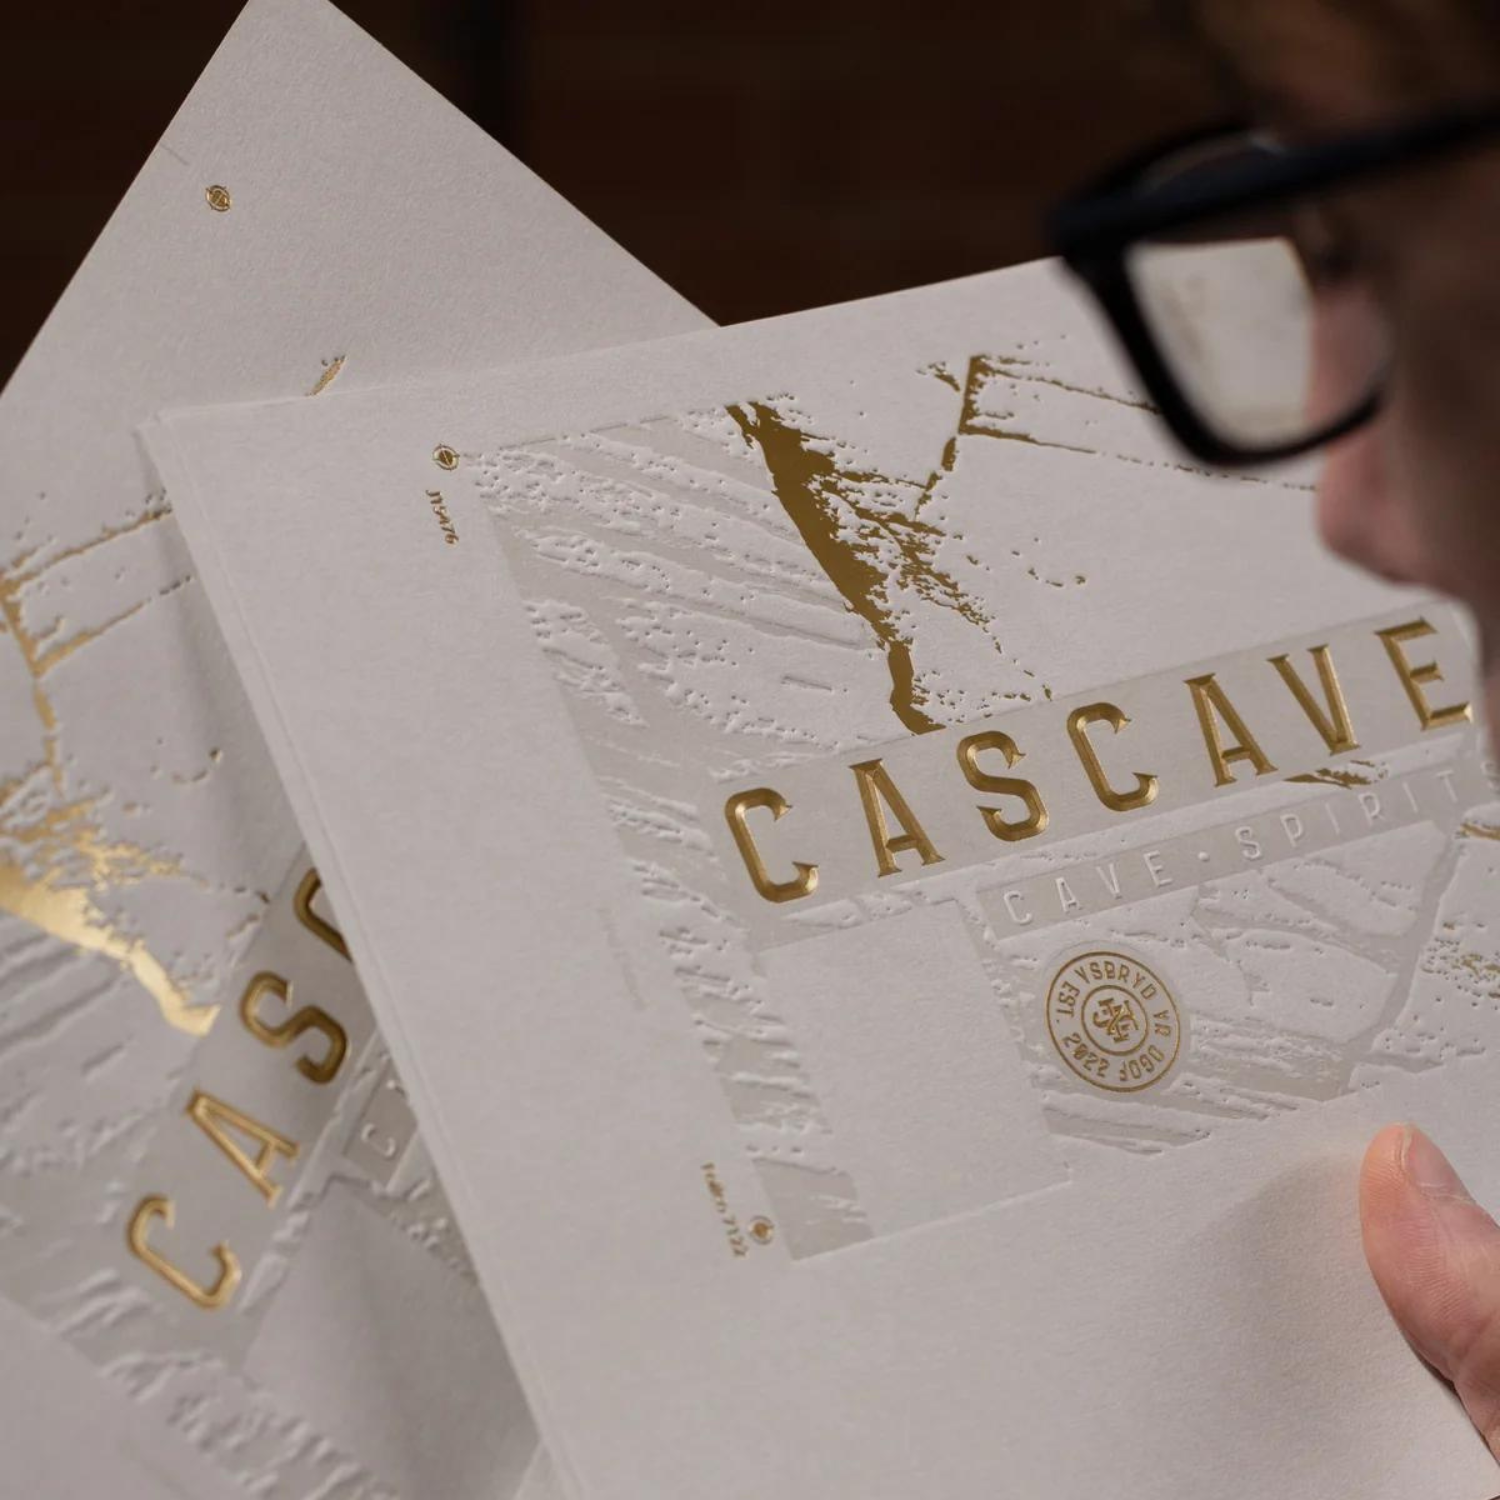 Cascave Labels in Production